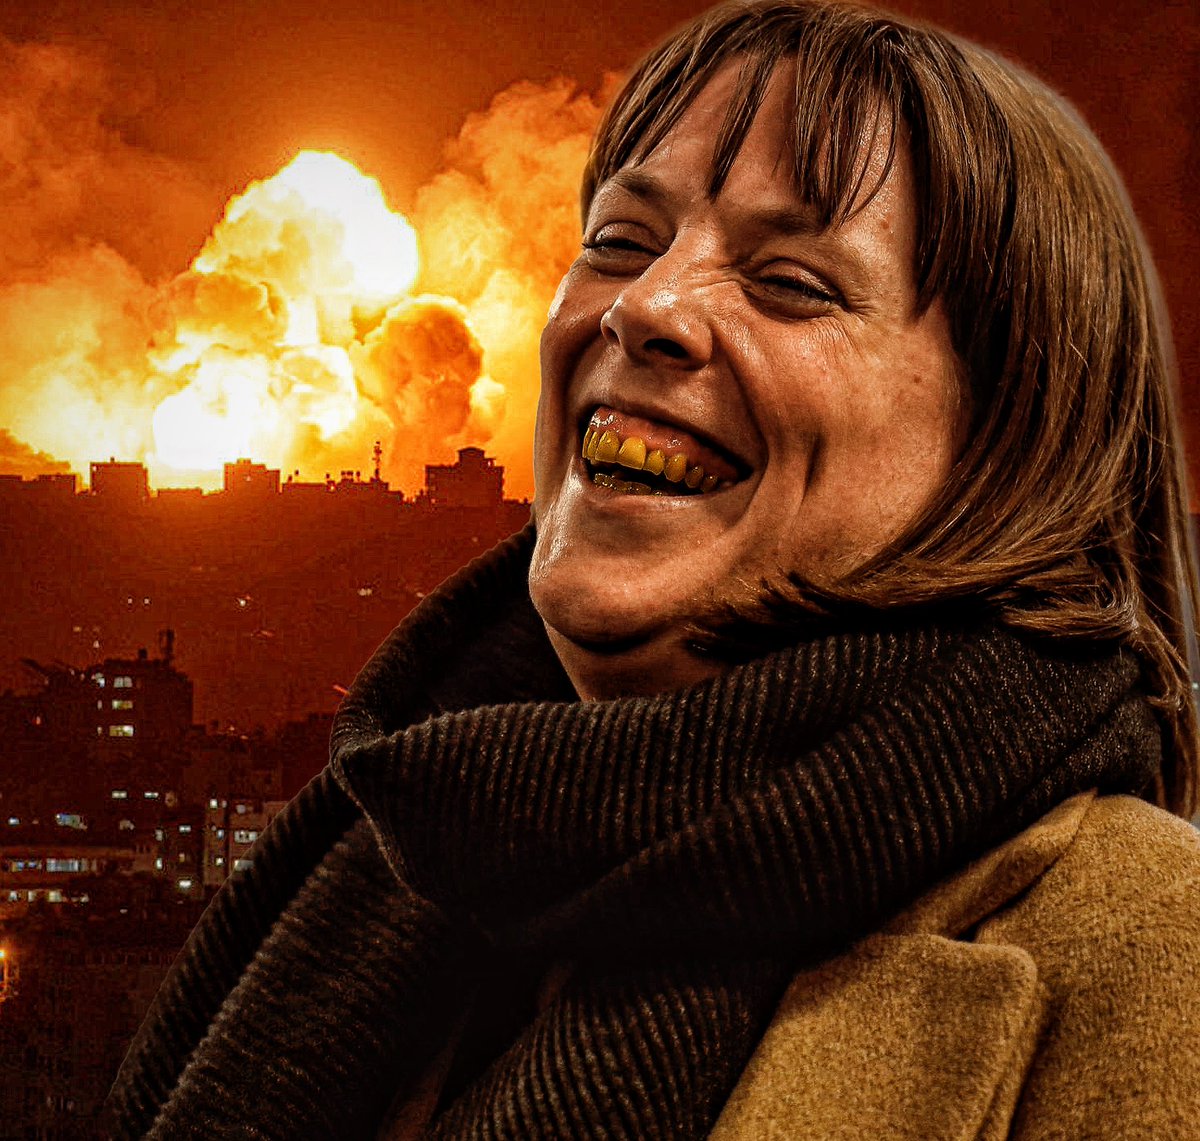 No-nonsense Brummie firebrand MP @JessPhillips manages to see the funny side of things at her international book launch.